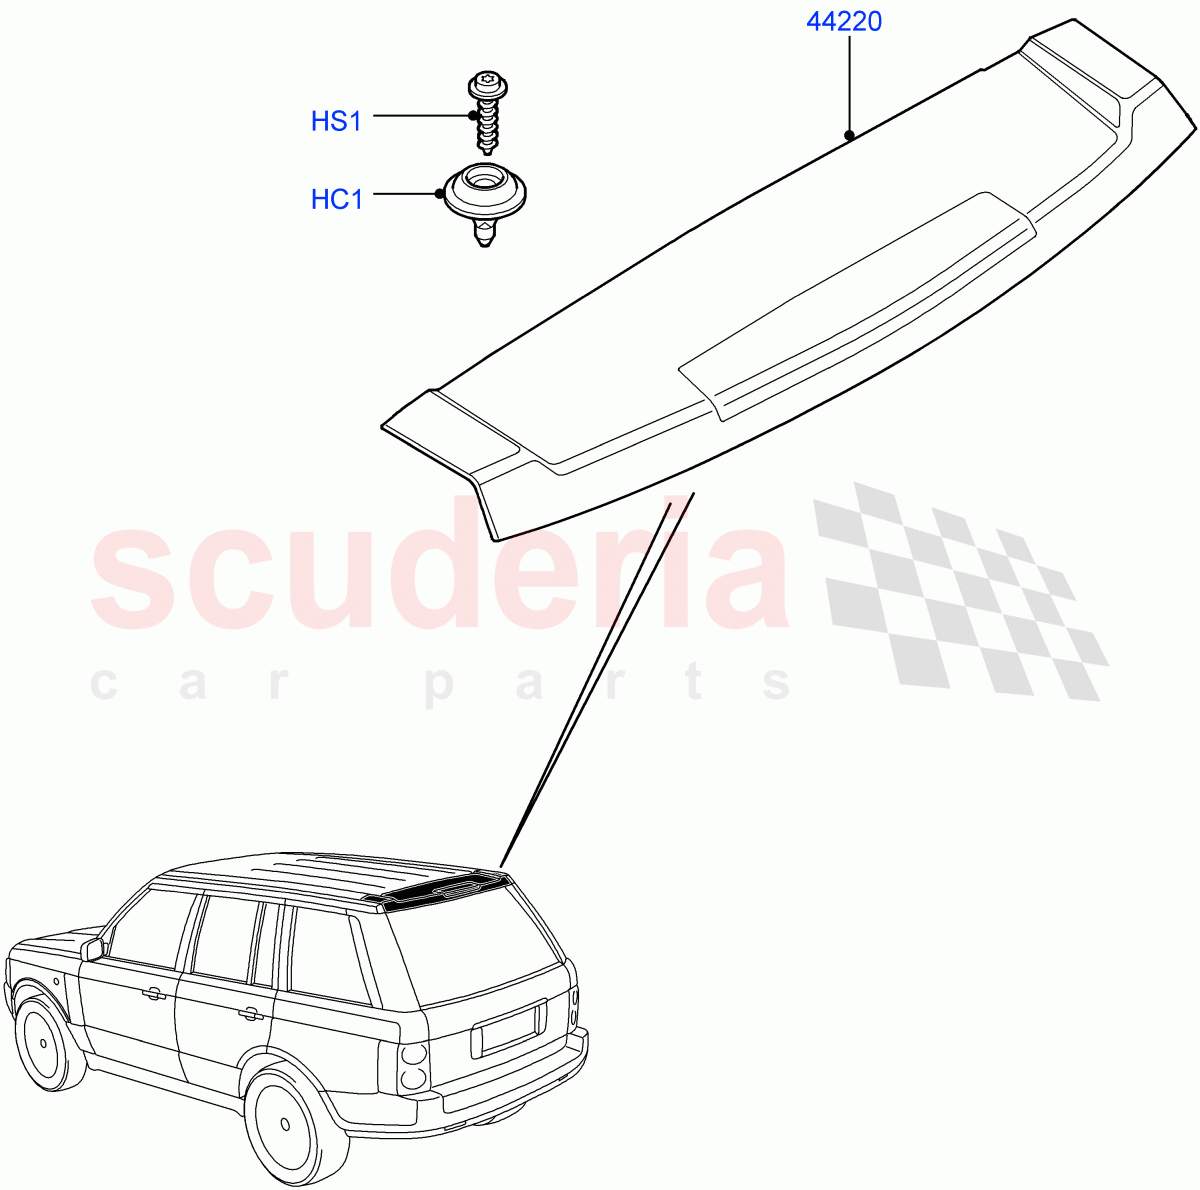 Spoiler And Related Parts((V)FROMAA000001) of Land Rover Land Rover Range Rover (2010-2012) [5.0 OHC SGDI SC V8 Petrol]